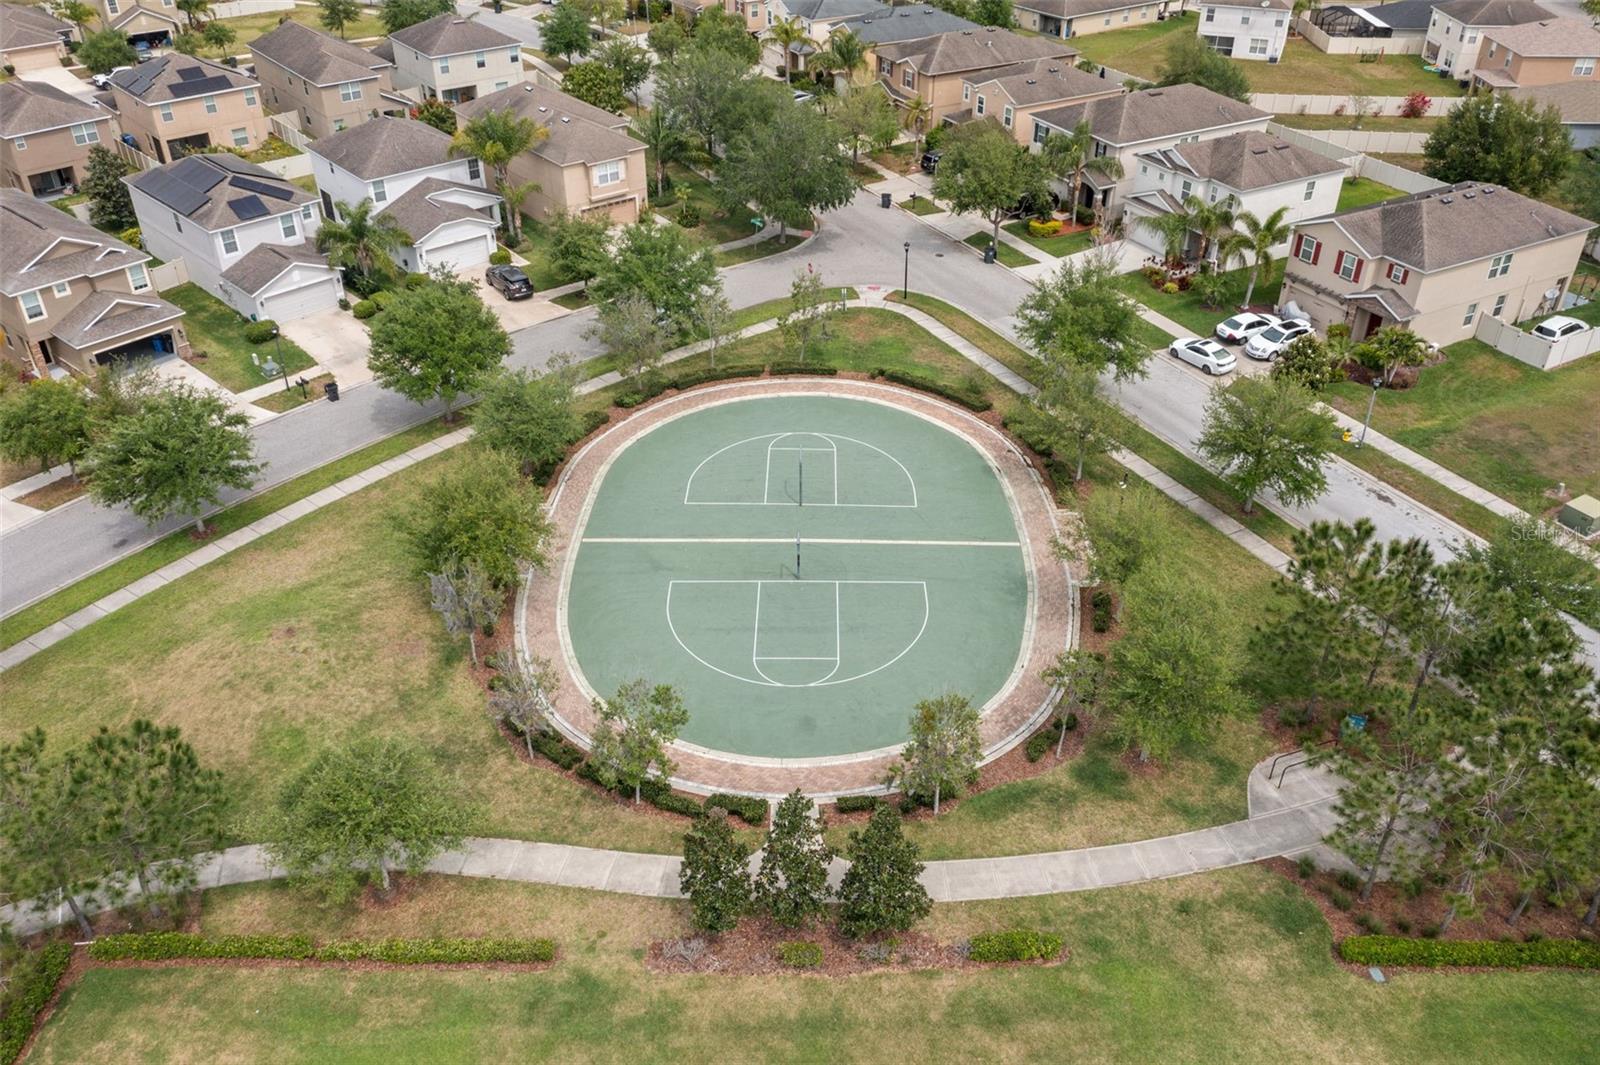 Aerial view of community sport courts